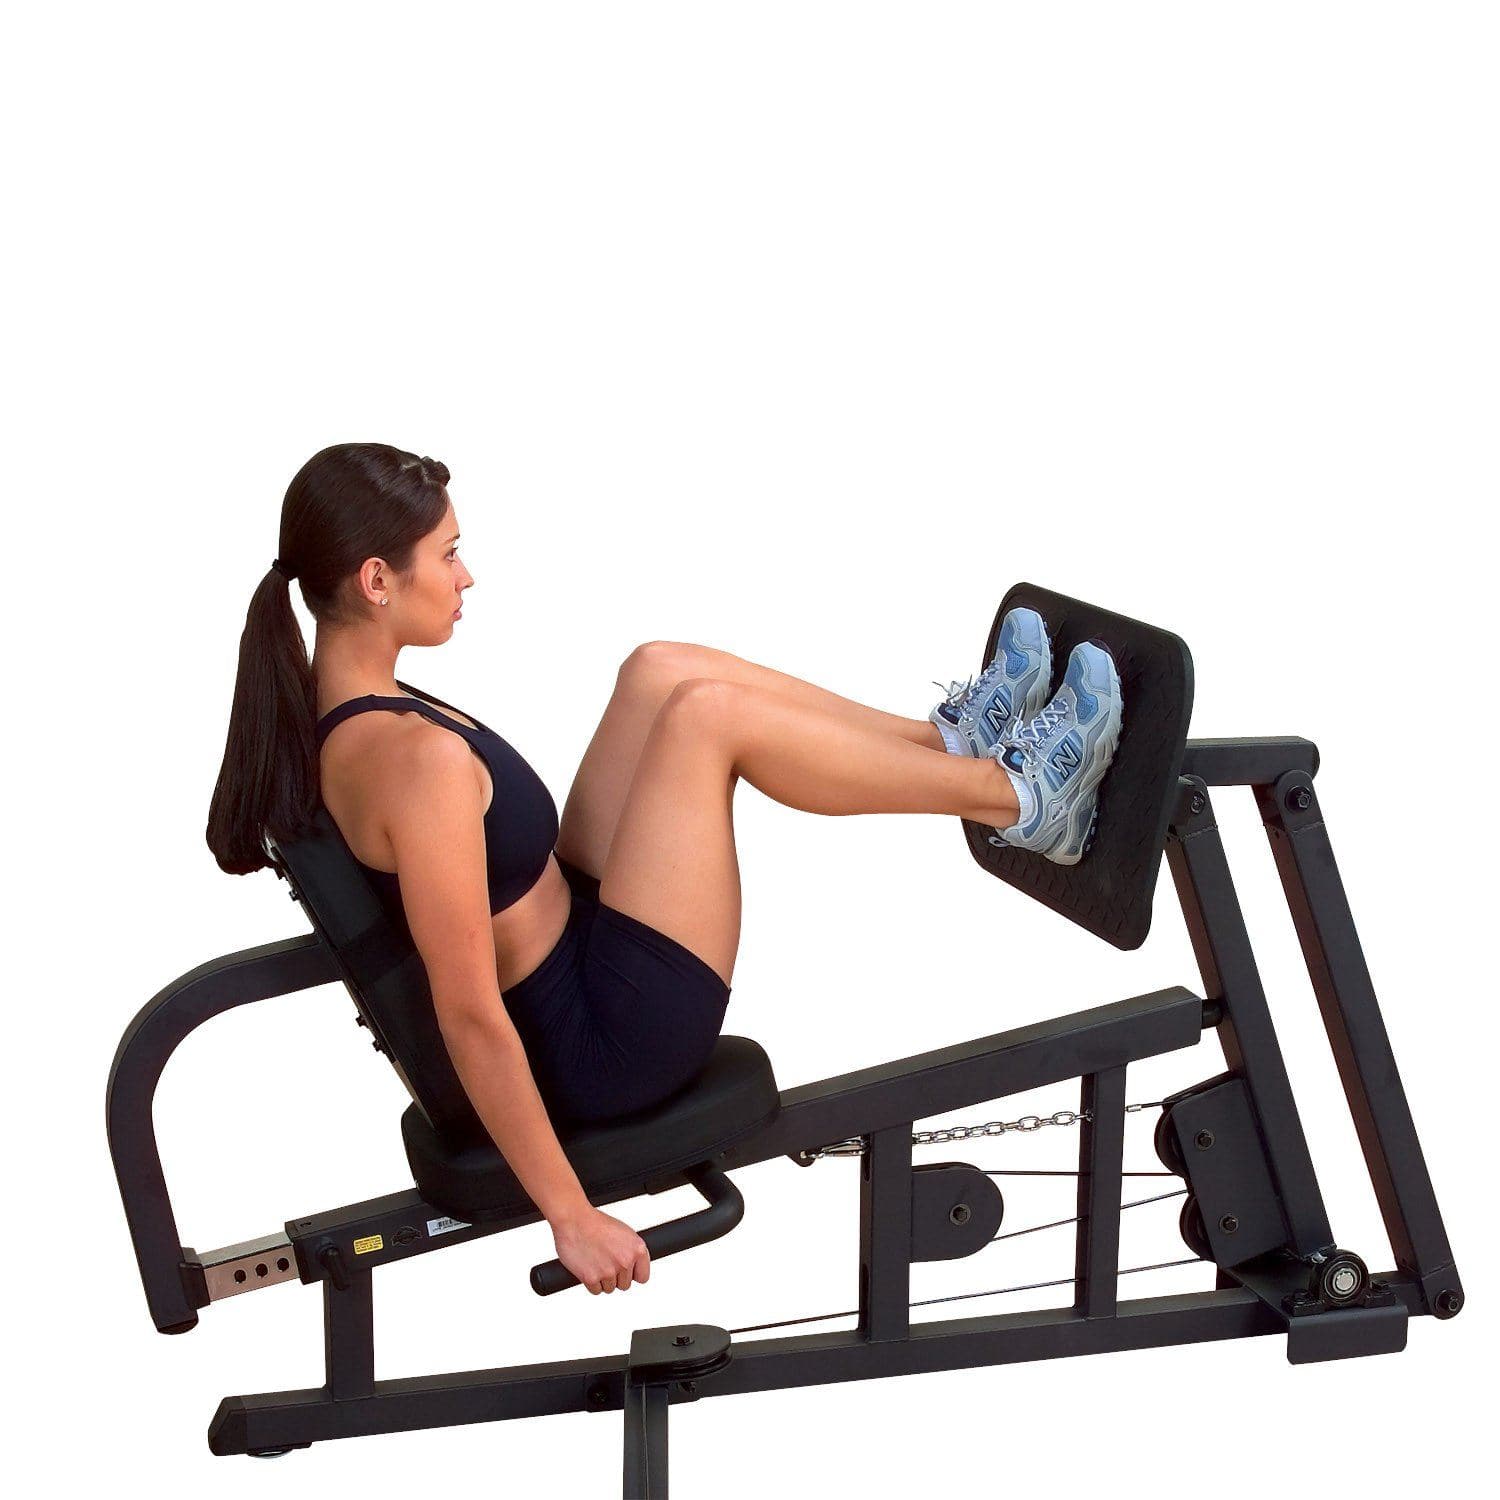 Body-Solid G Series Leg Press Attachment (GLP) home gym option Body-Solid 